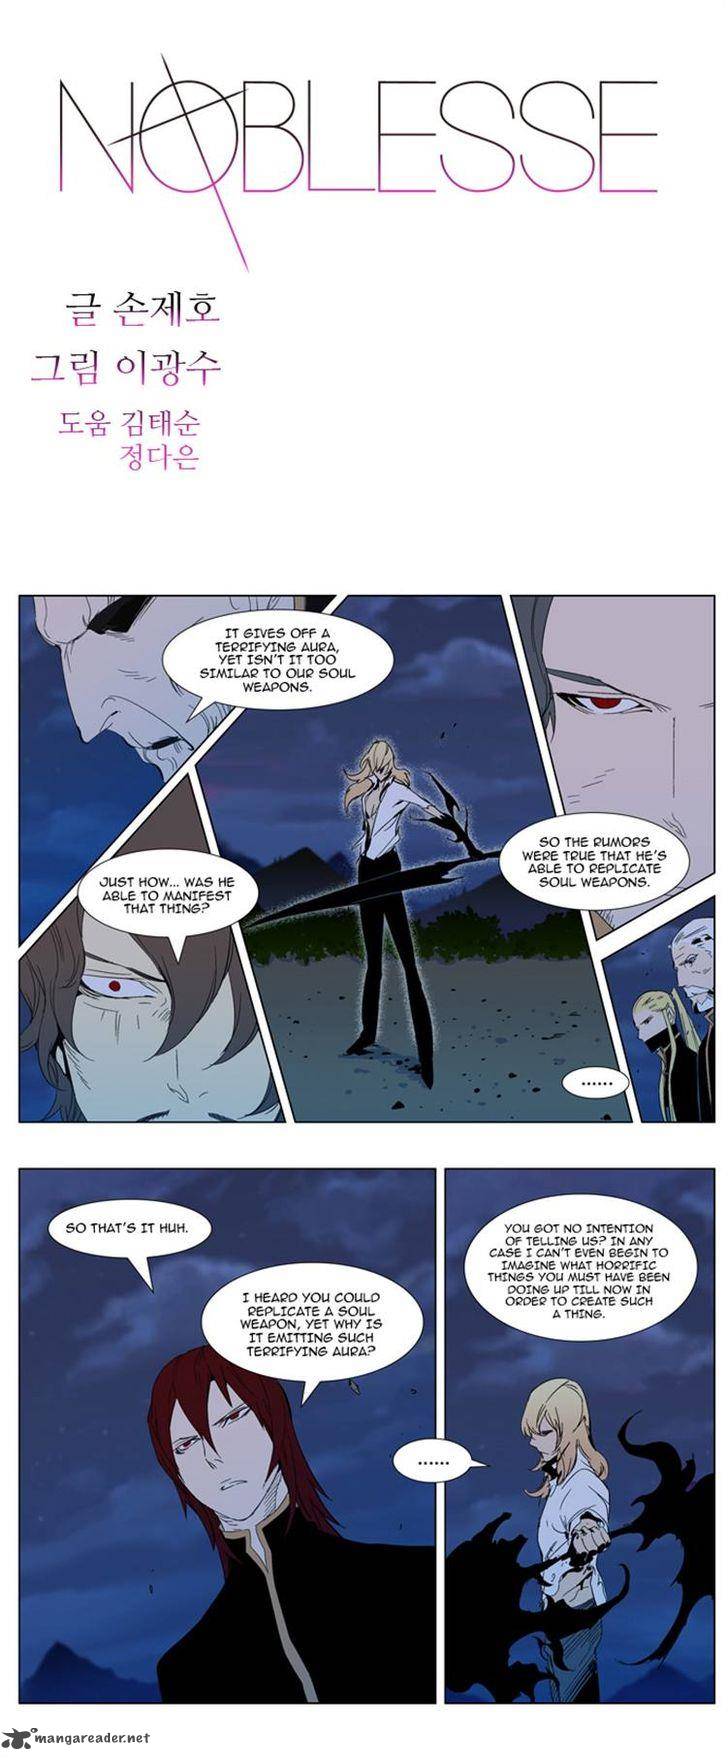 Noblesse 292 1